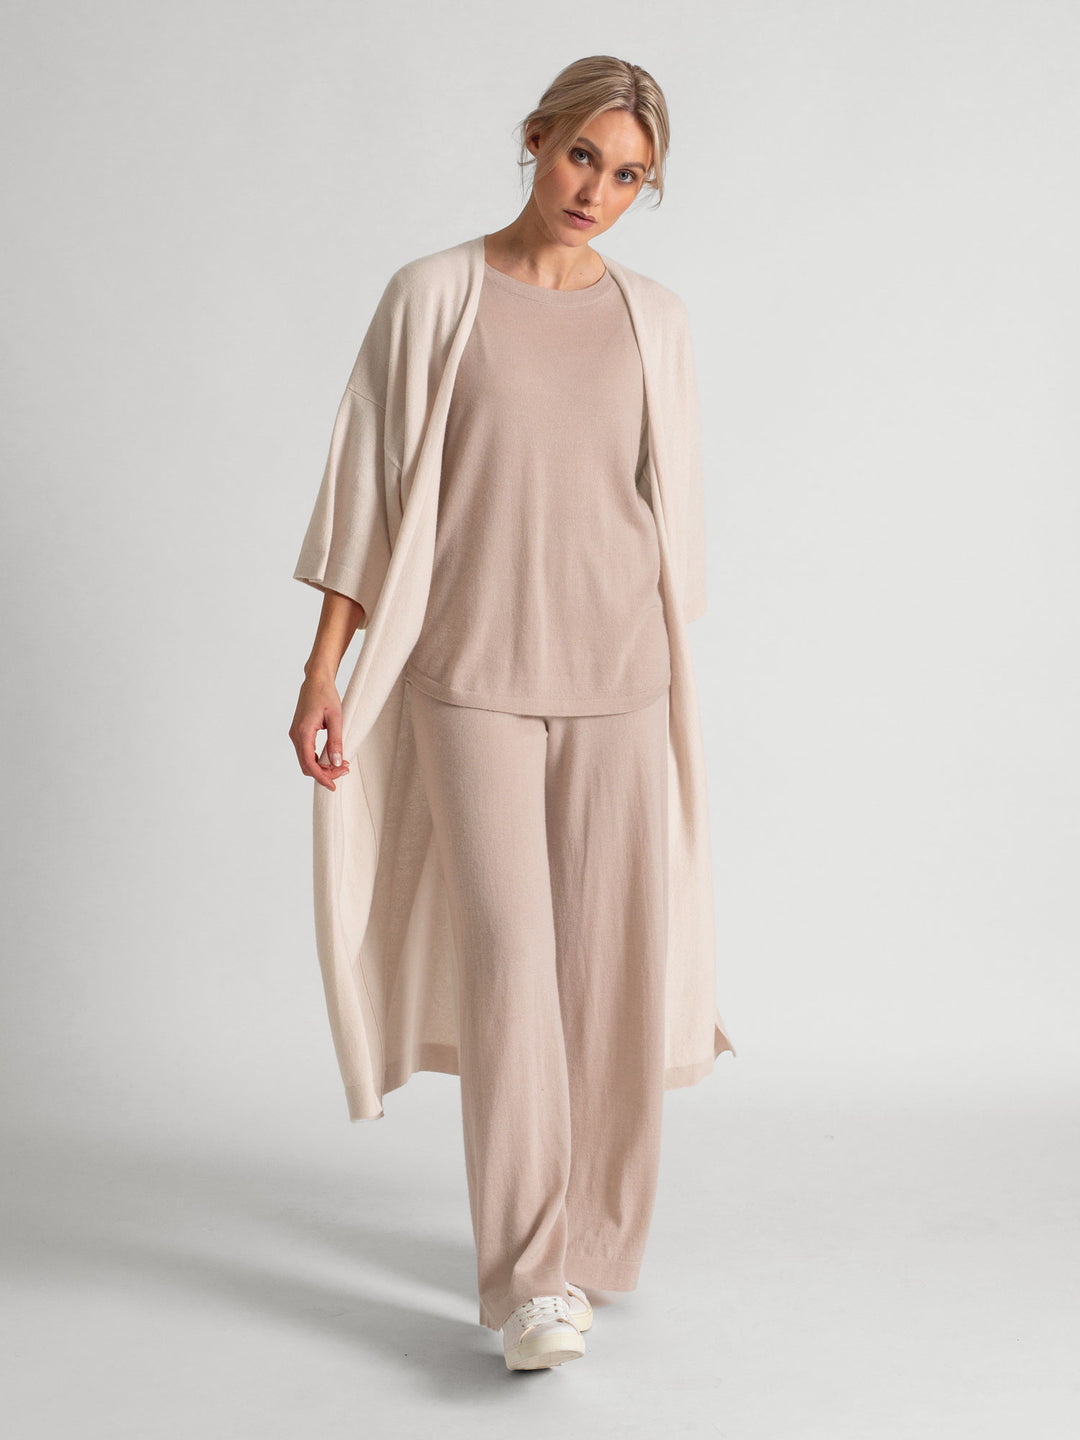  Cashmere t-shirt "Airy" in 100% pure cashmere. Color: Feather. Scandinavian design by Kashmina.